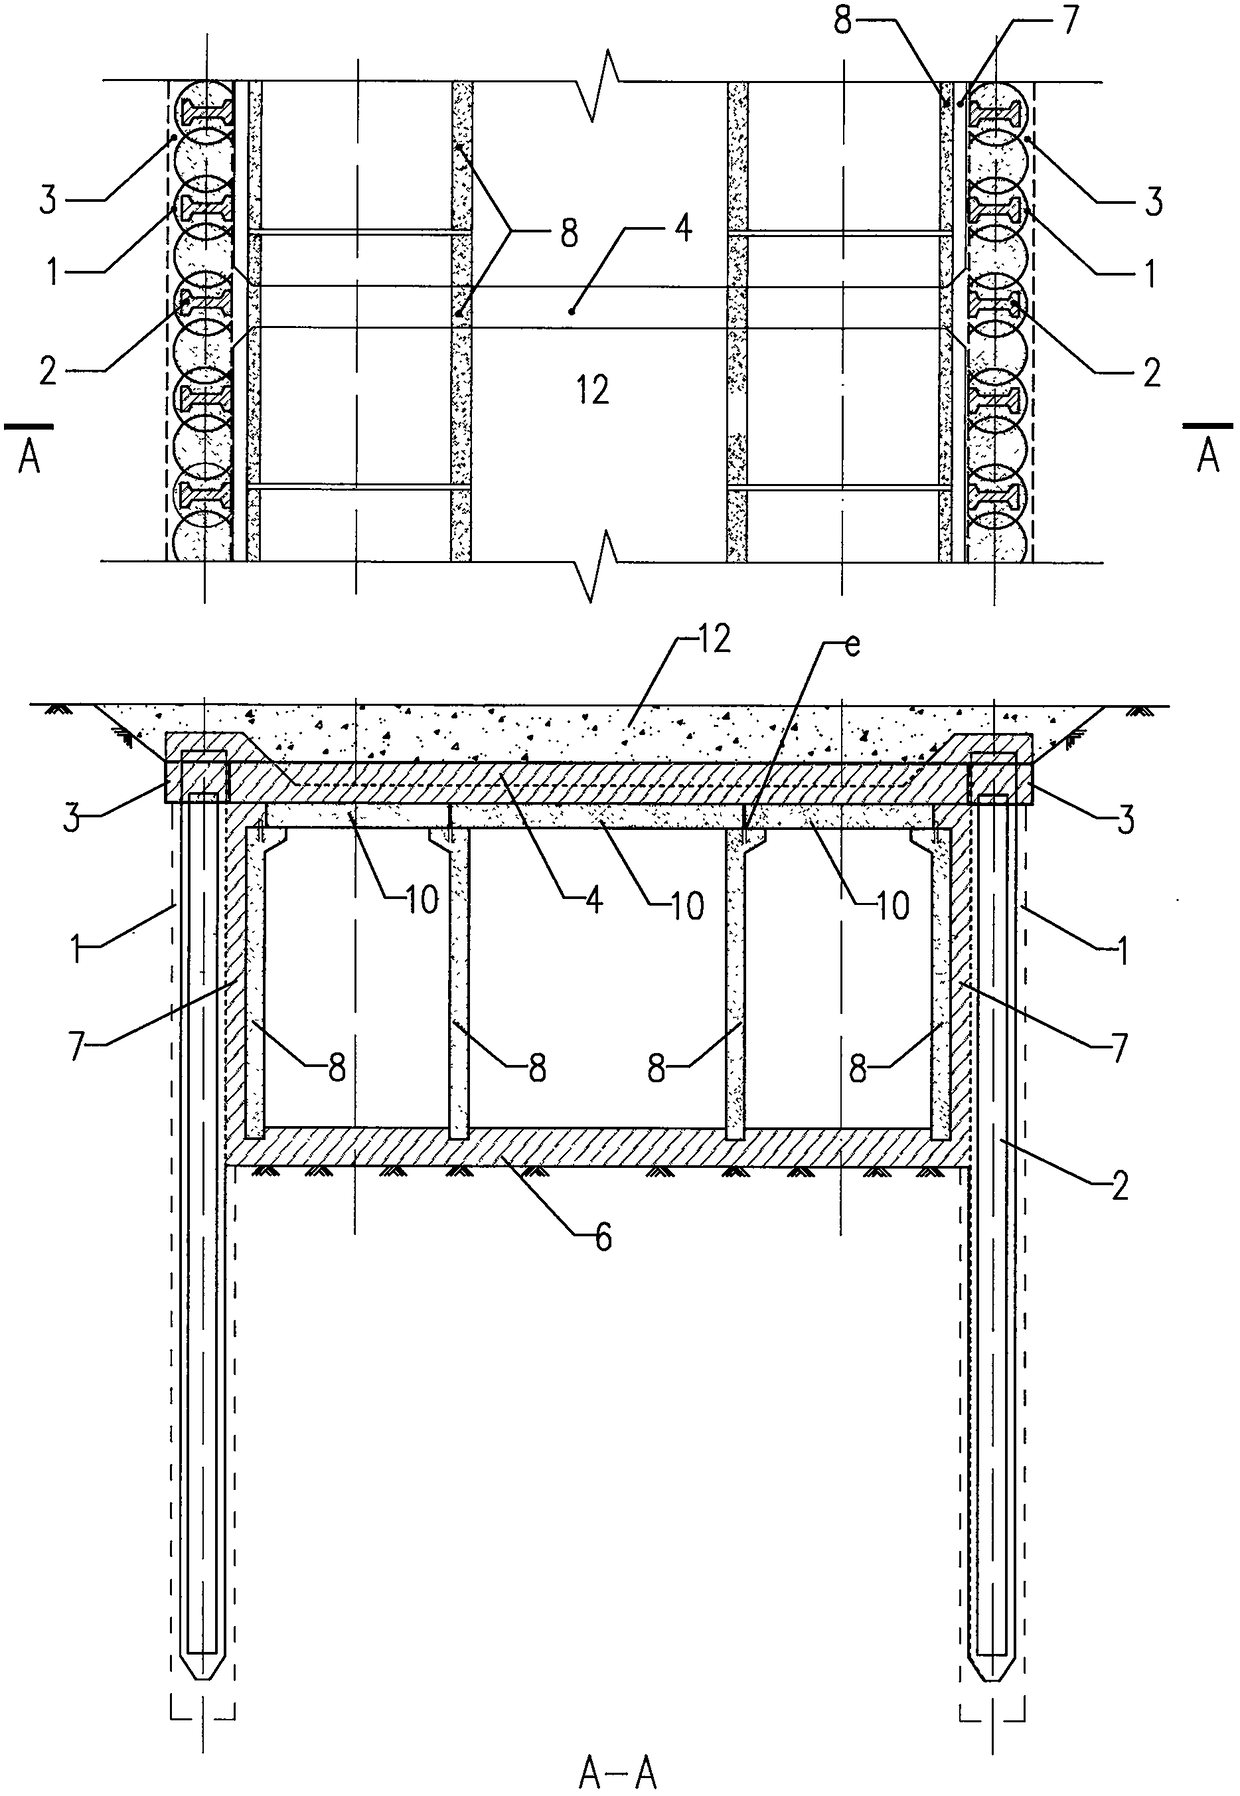 Precast plate and site-cast concrete combined underground pipe rack construction method considering structure and foundation